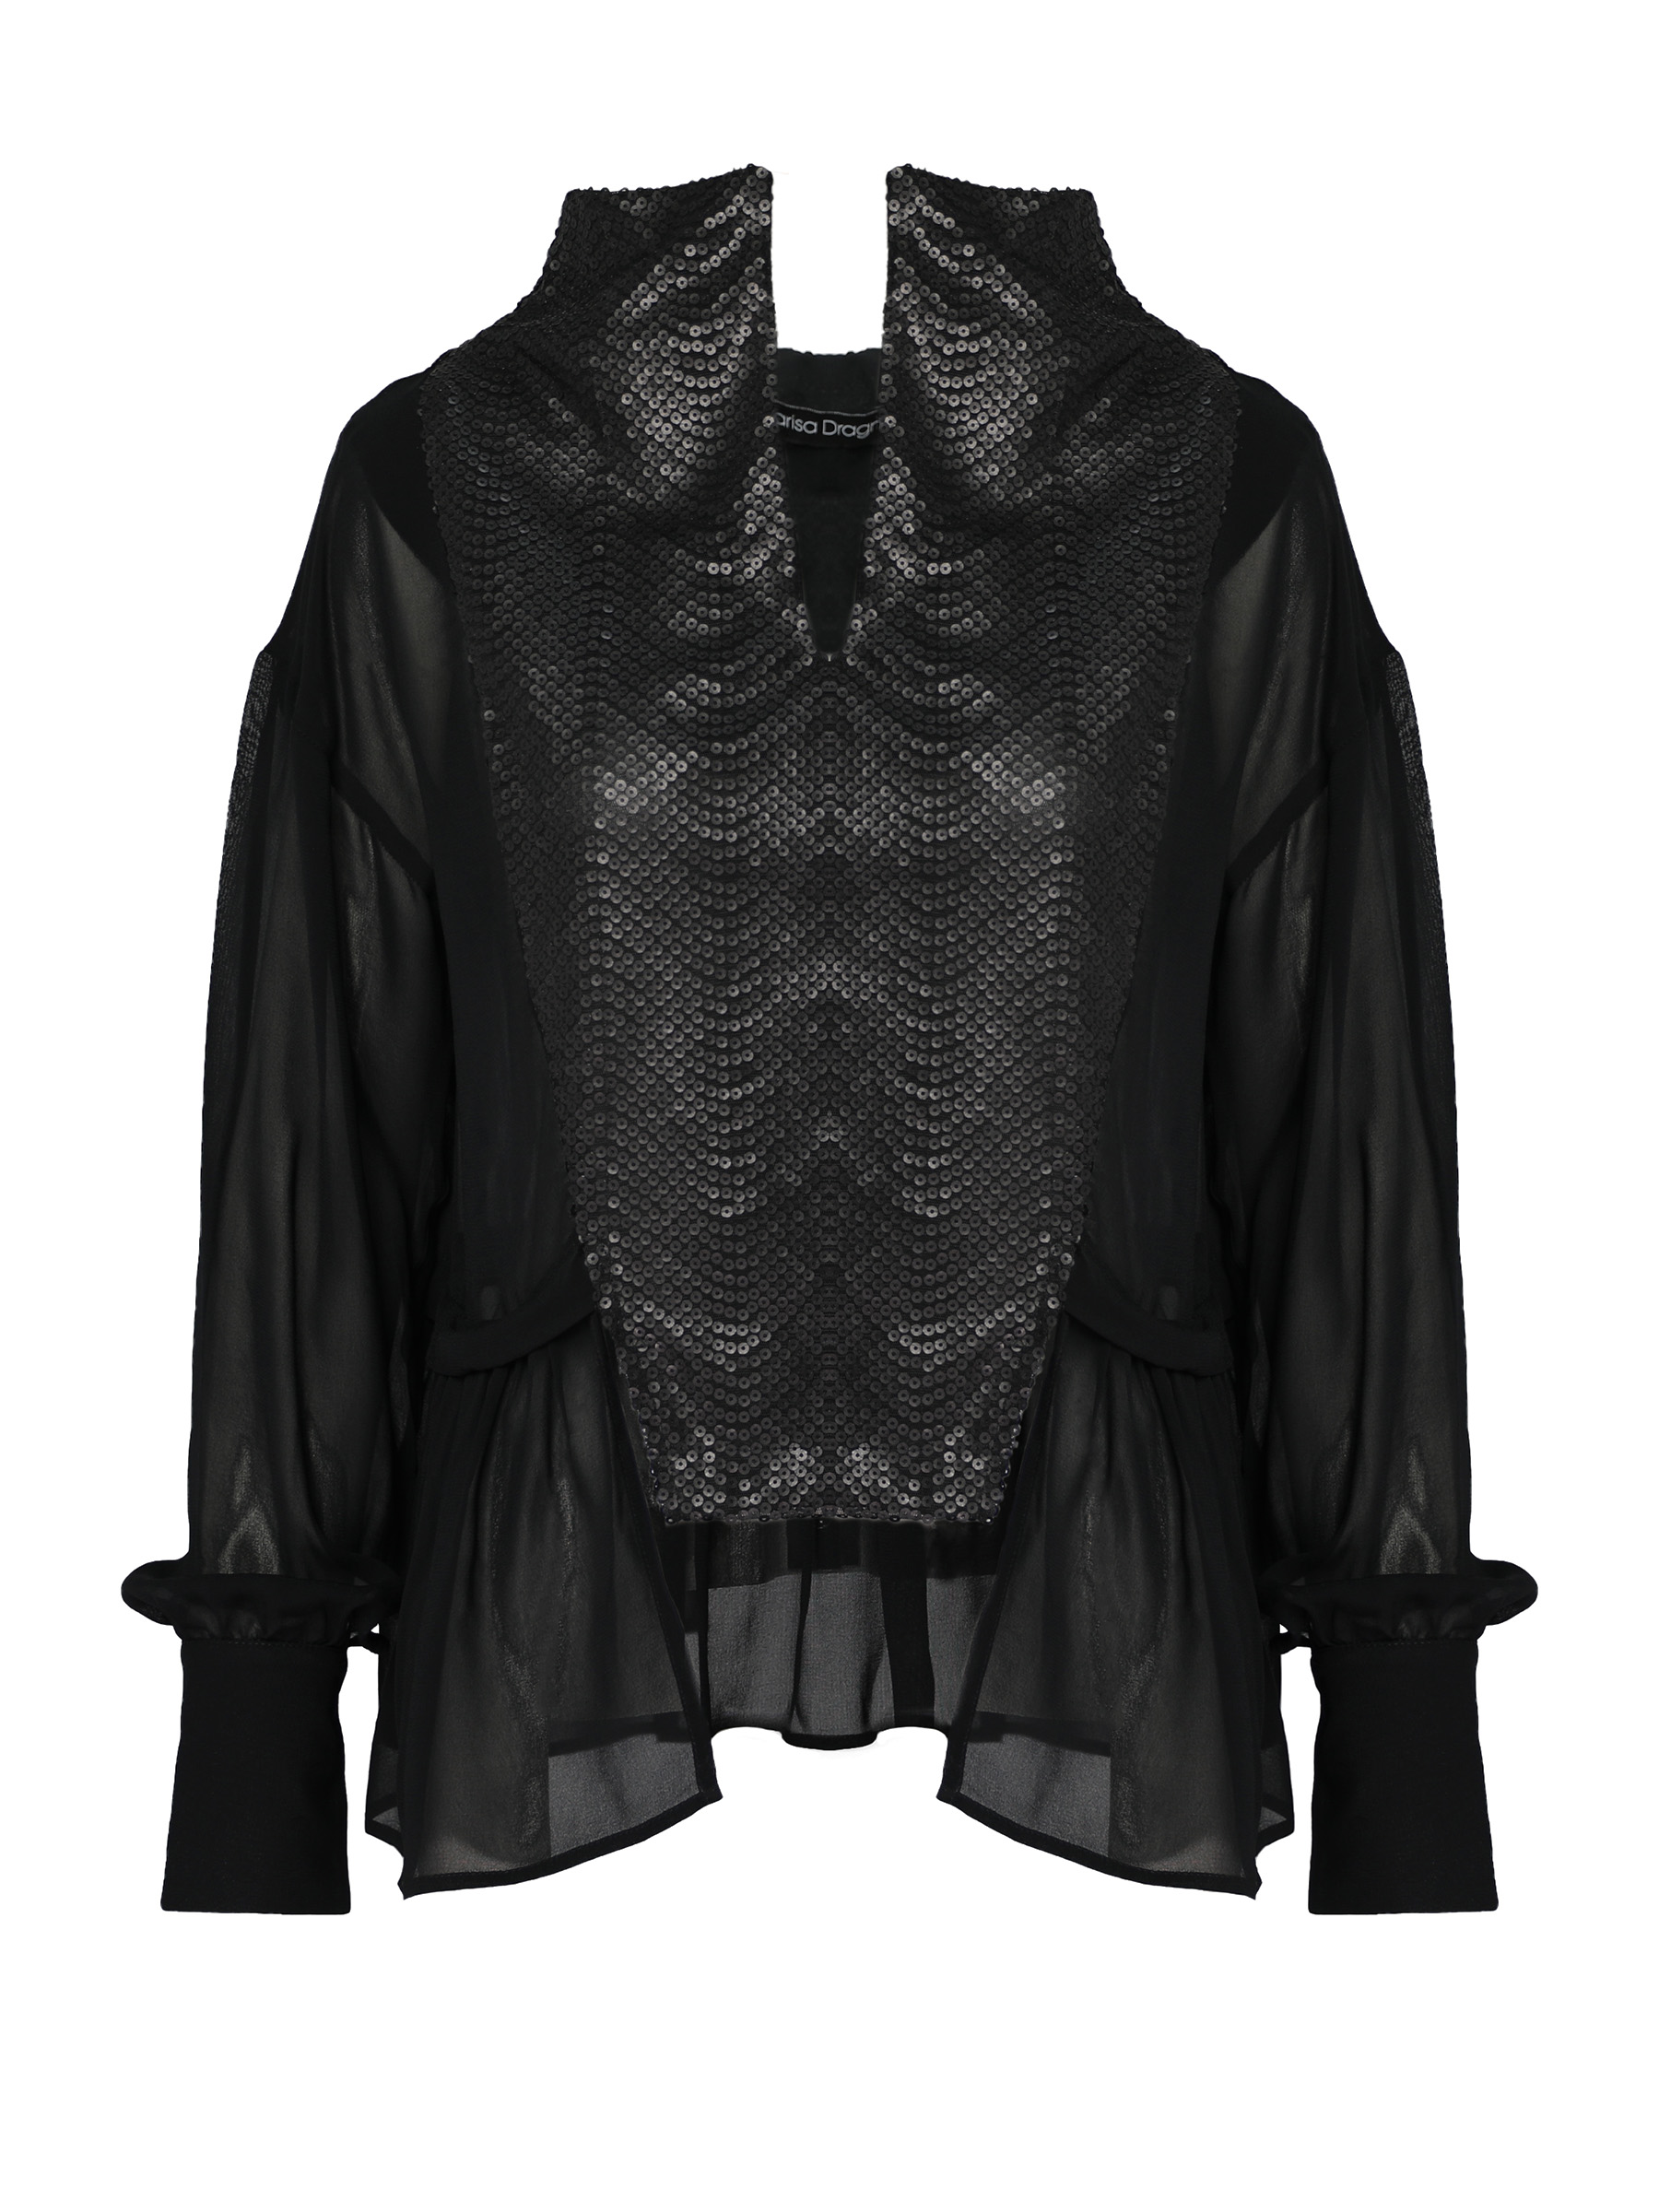 Black sequin shirt with long sleeves